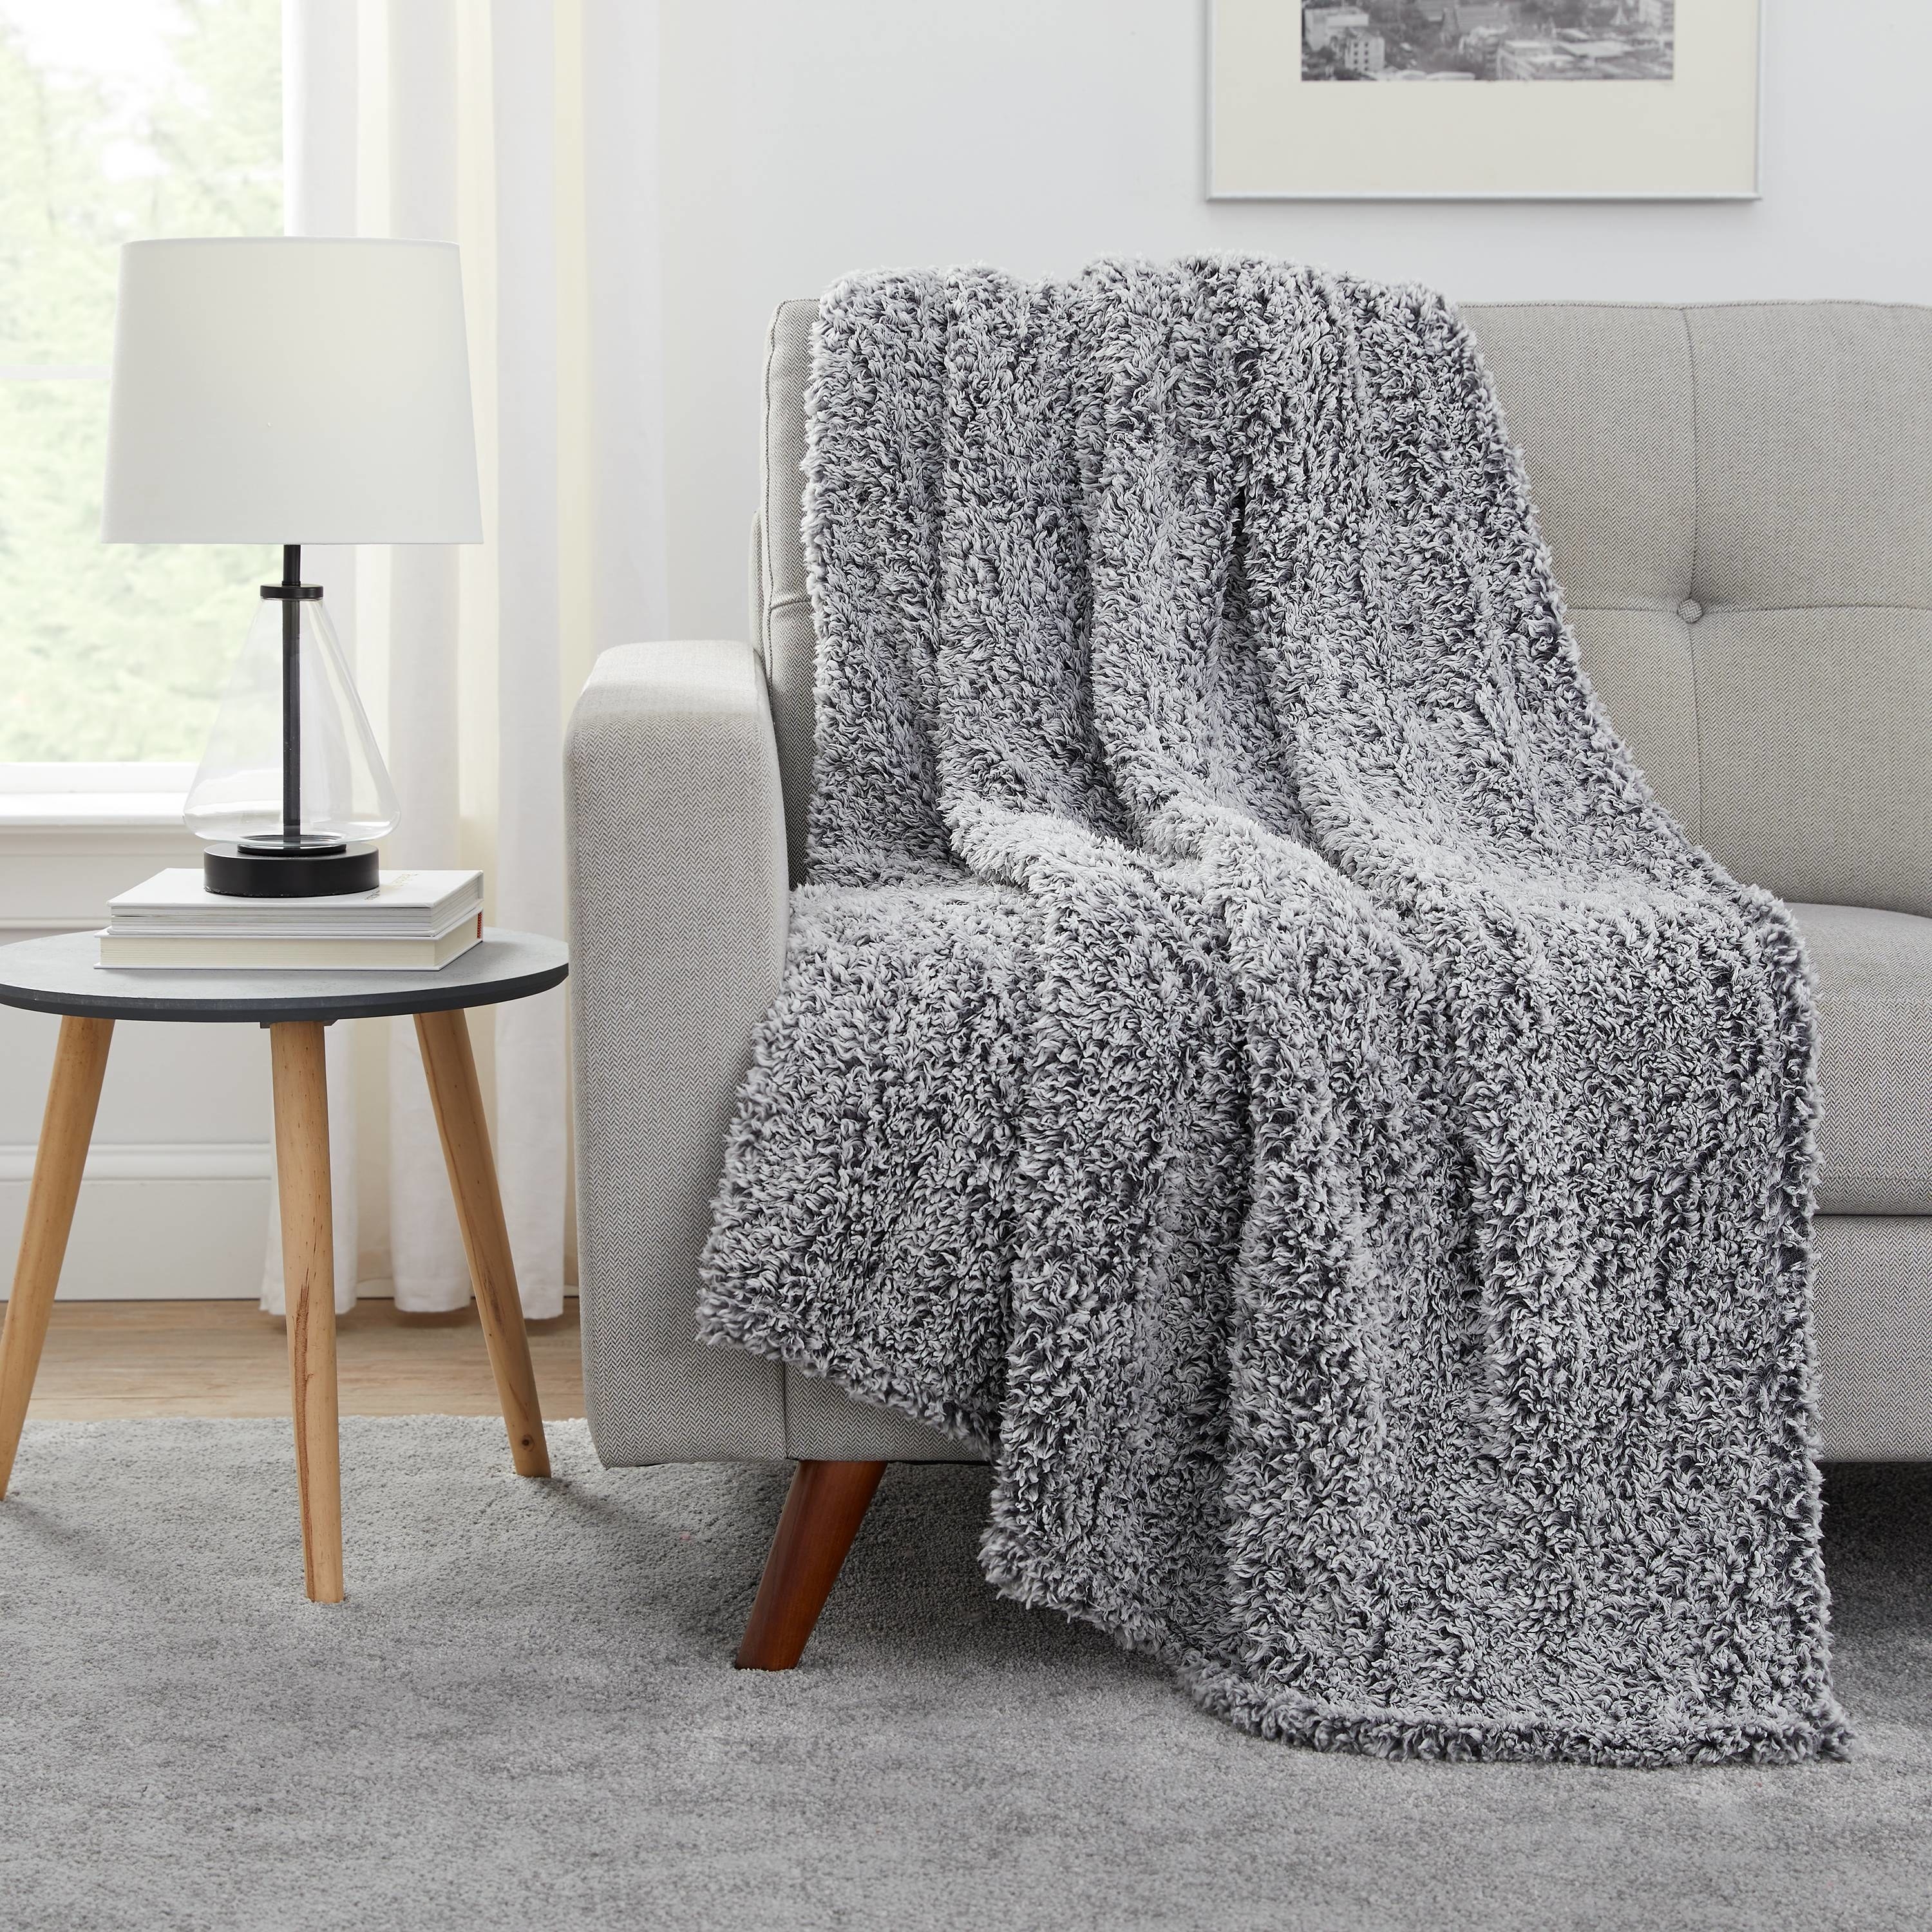 A grey sherpa blanket draped over a couch